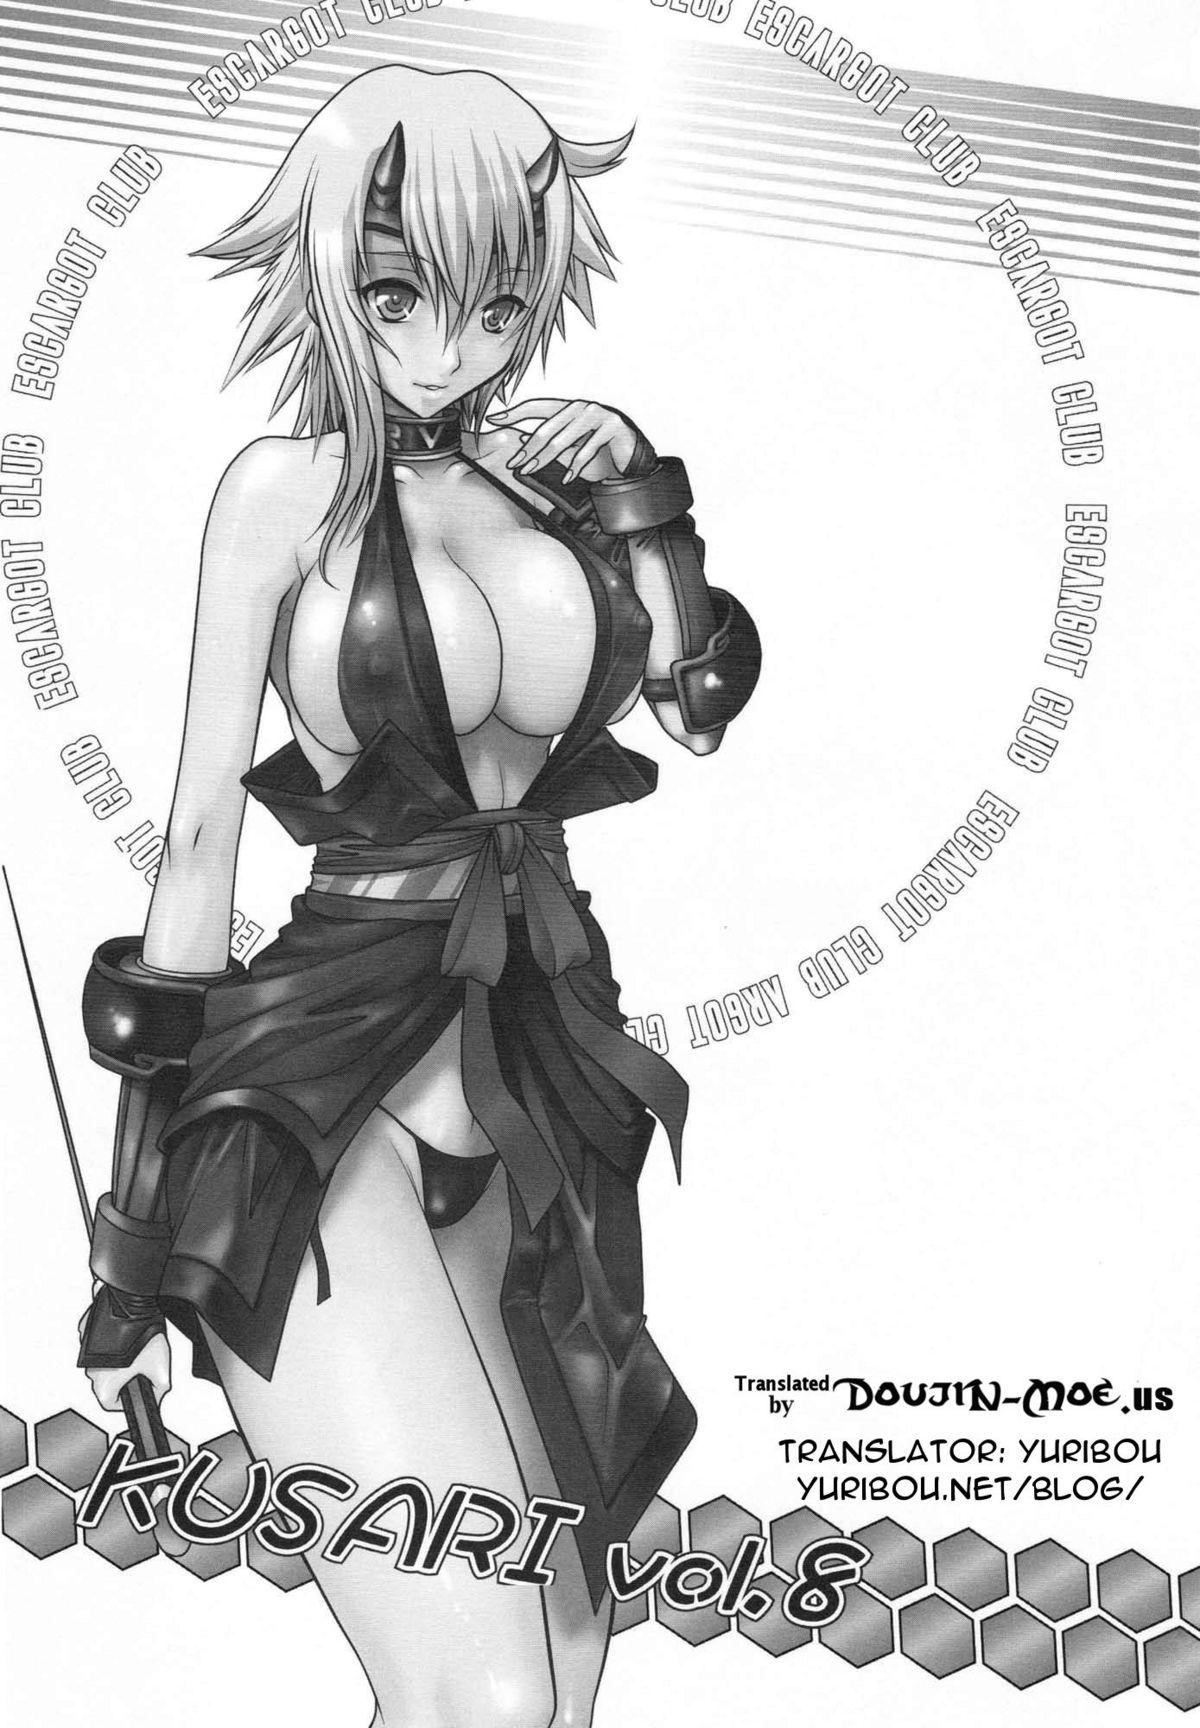 First Time Kusari Vol. 8 - Queens blade Arabe - Page 2